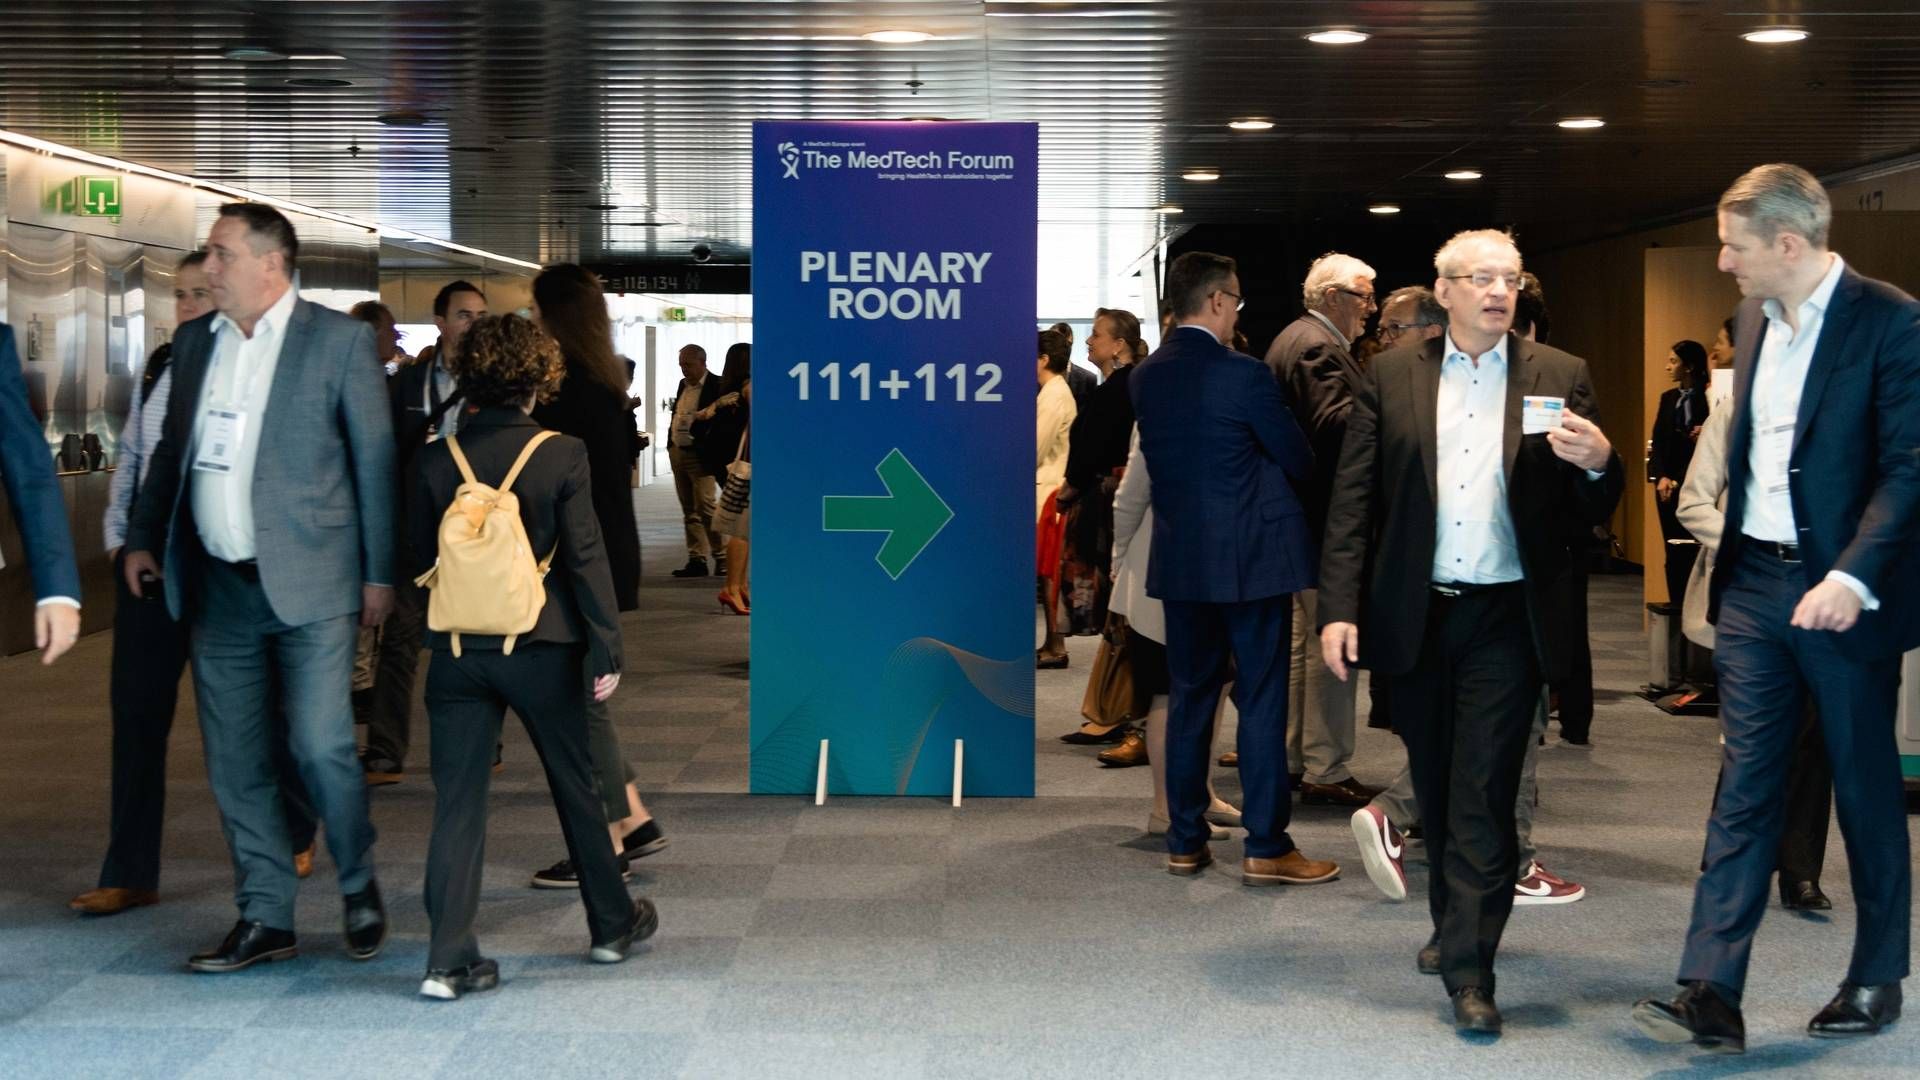 The EU's Medical Device Regulation was a hot topic during Europe's largest annual health and medtech conference, Medtech Forum, which recently took place in May | Photo: PR/Medtech Europe